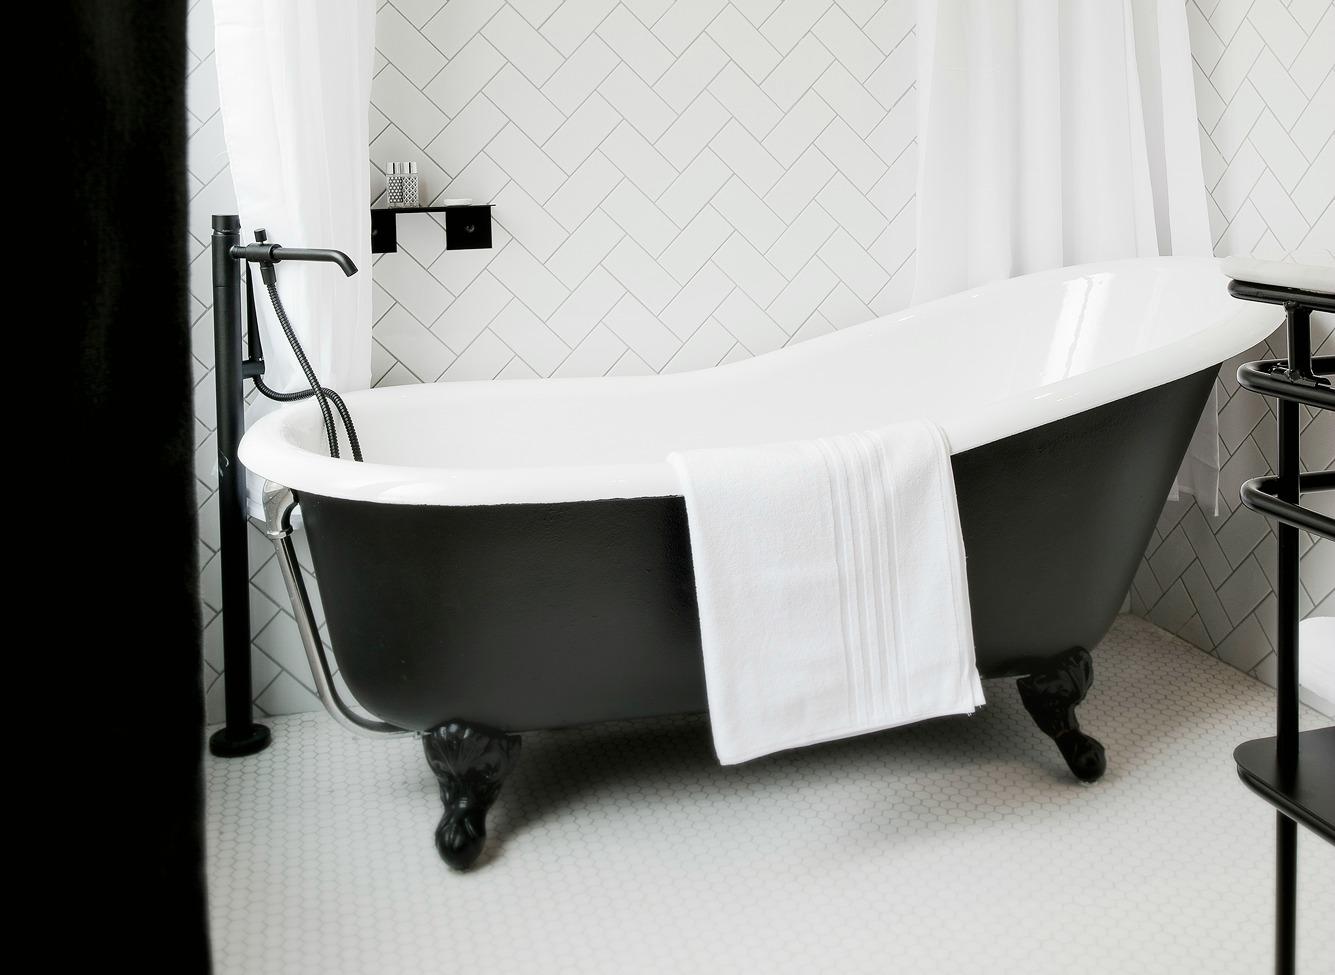 You can book a room with a freestanding bath